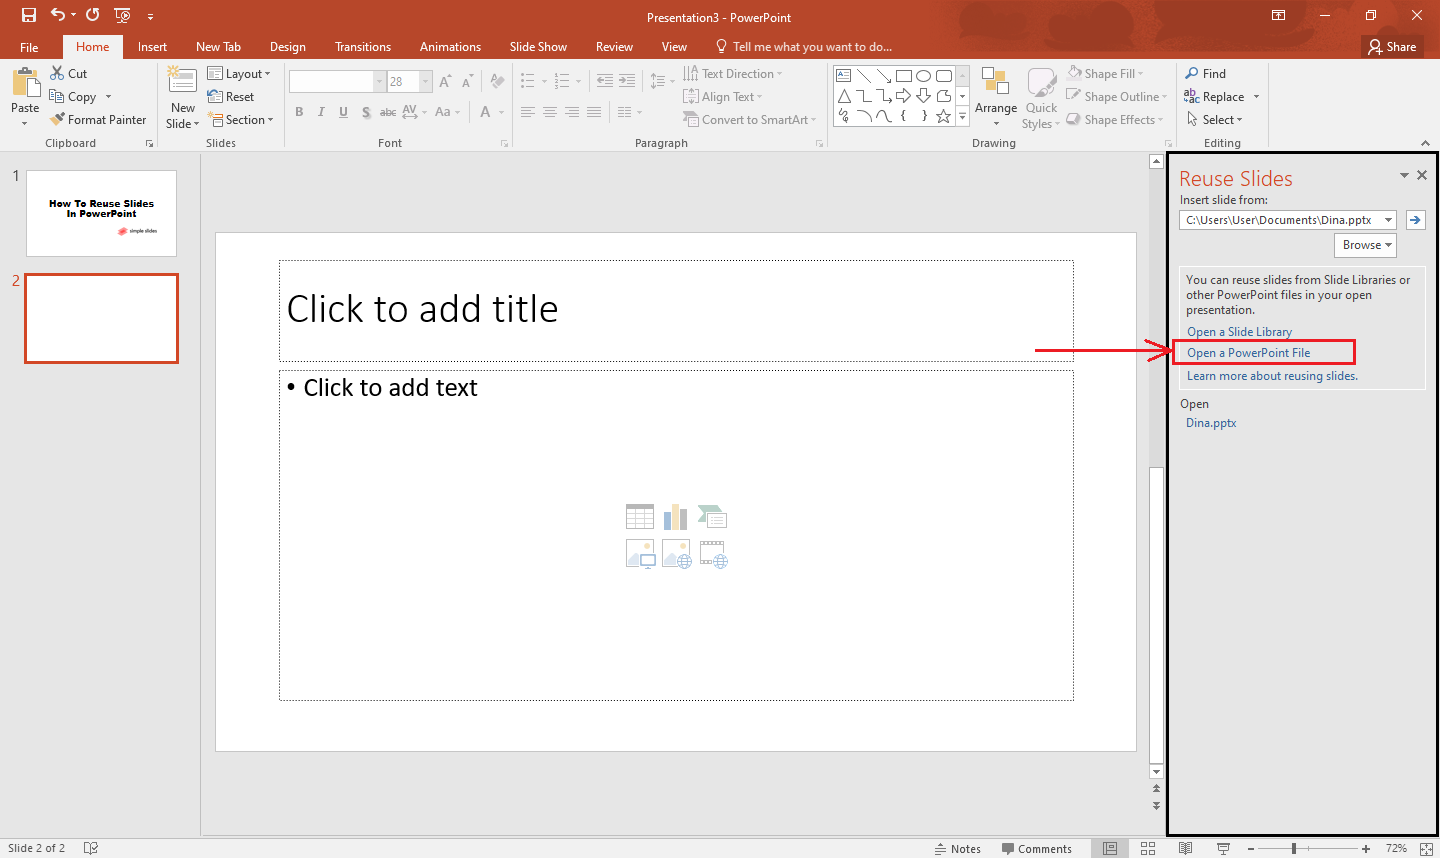 In the "Reuse Slides task pane, click "Open a PowerPoint File" option.